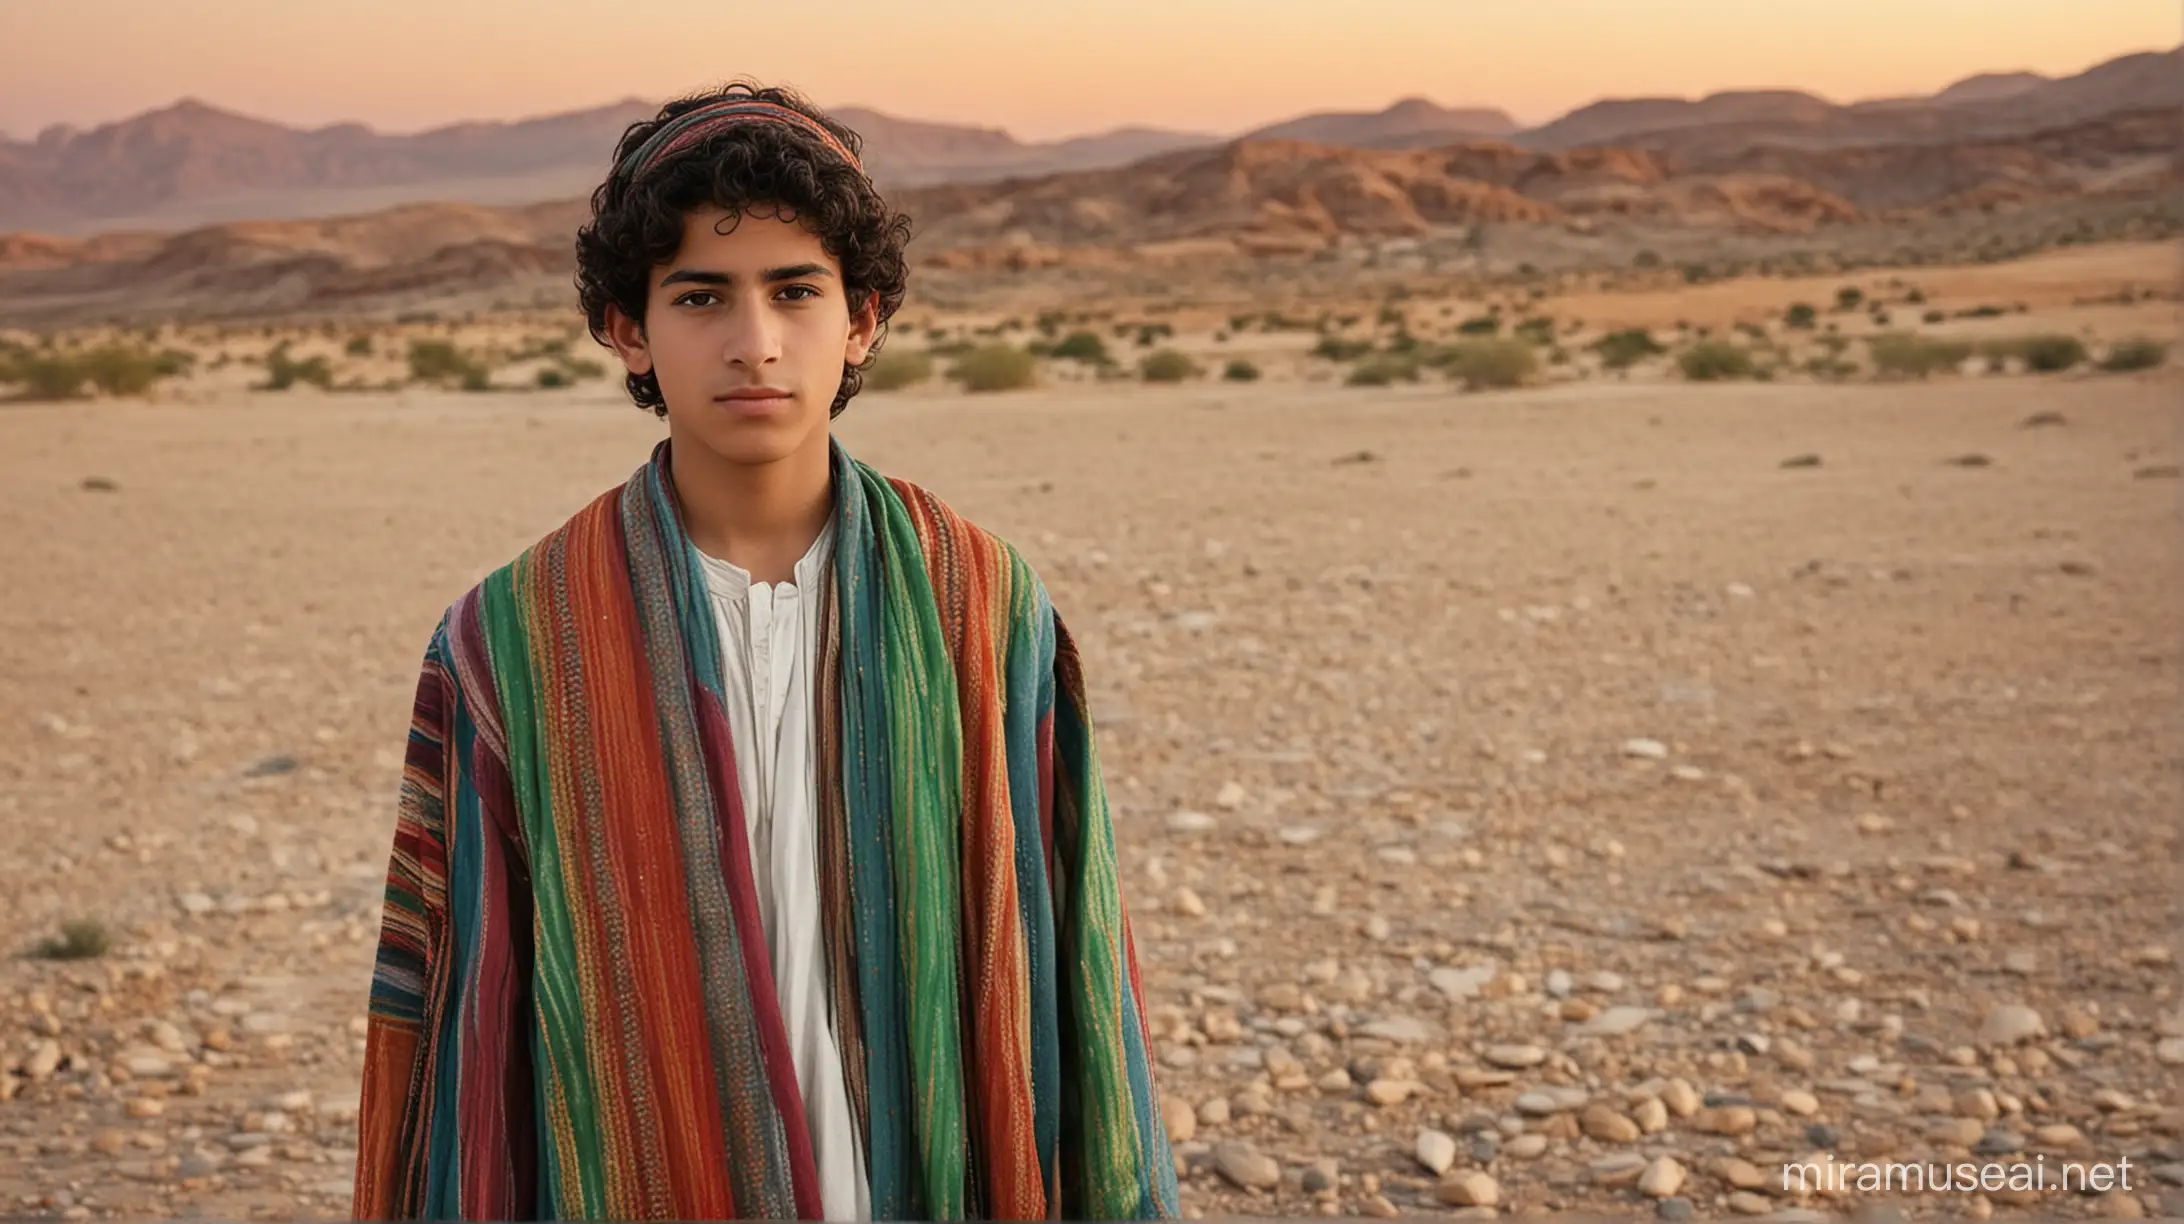 A Middle Eastern 17 year old boy wearing a coat of many colors, in a desert location during the Era of the Biblical Moses